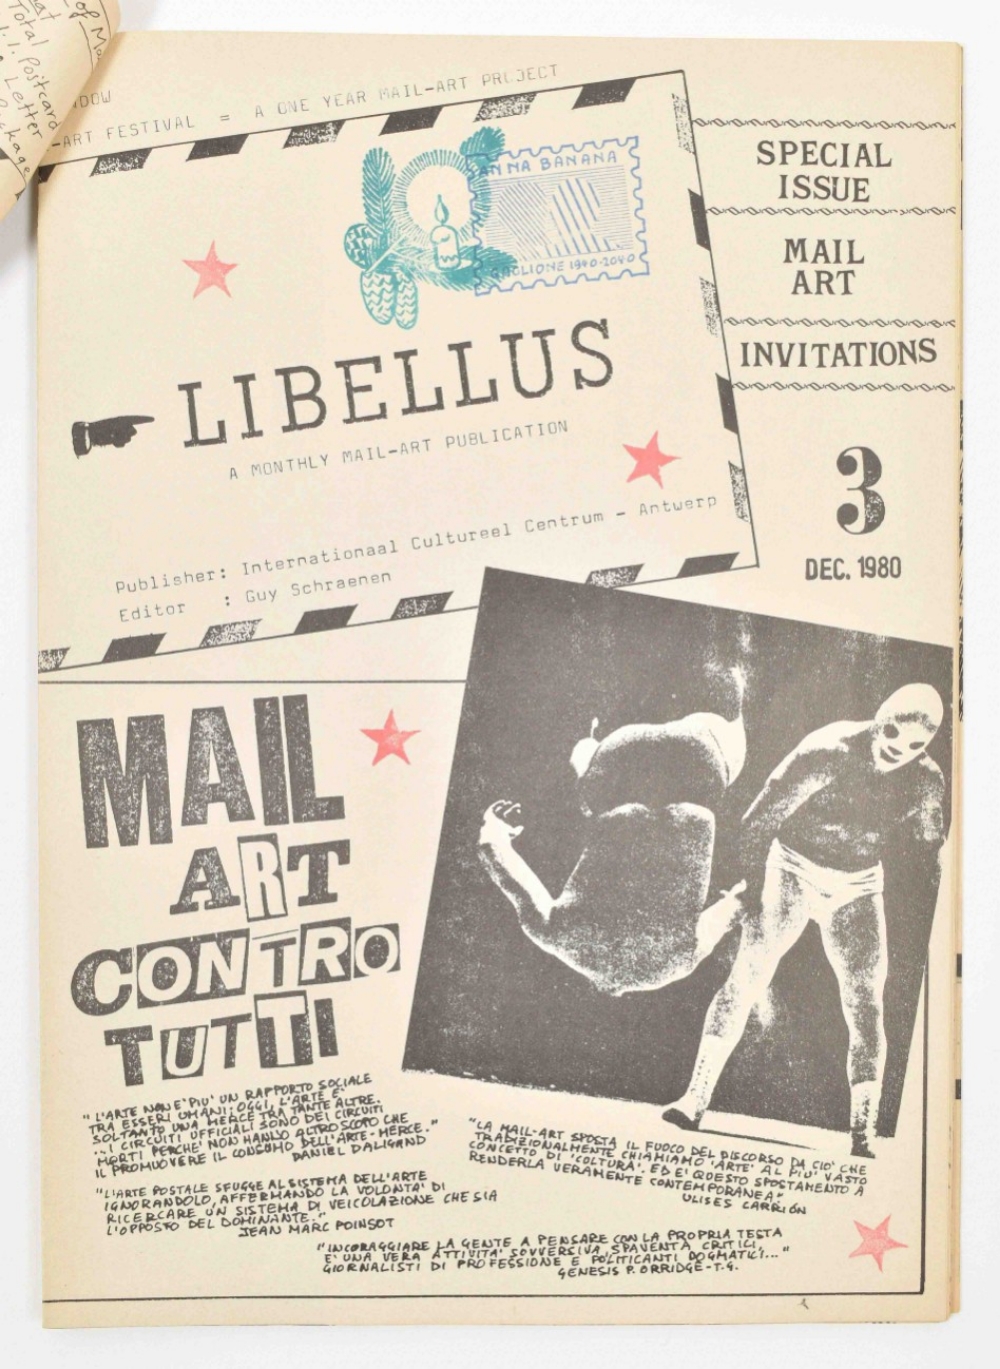 Guy Schraenen, Libellus, A monthly mail-art publication. Complete run Nos.1-12 - Image 5 of 8